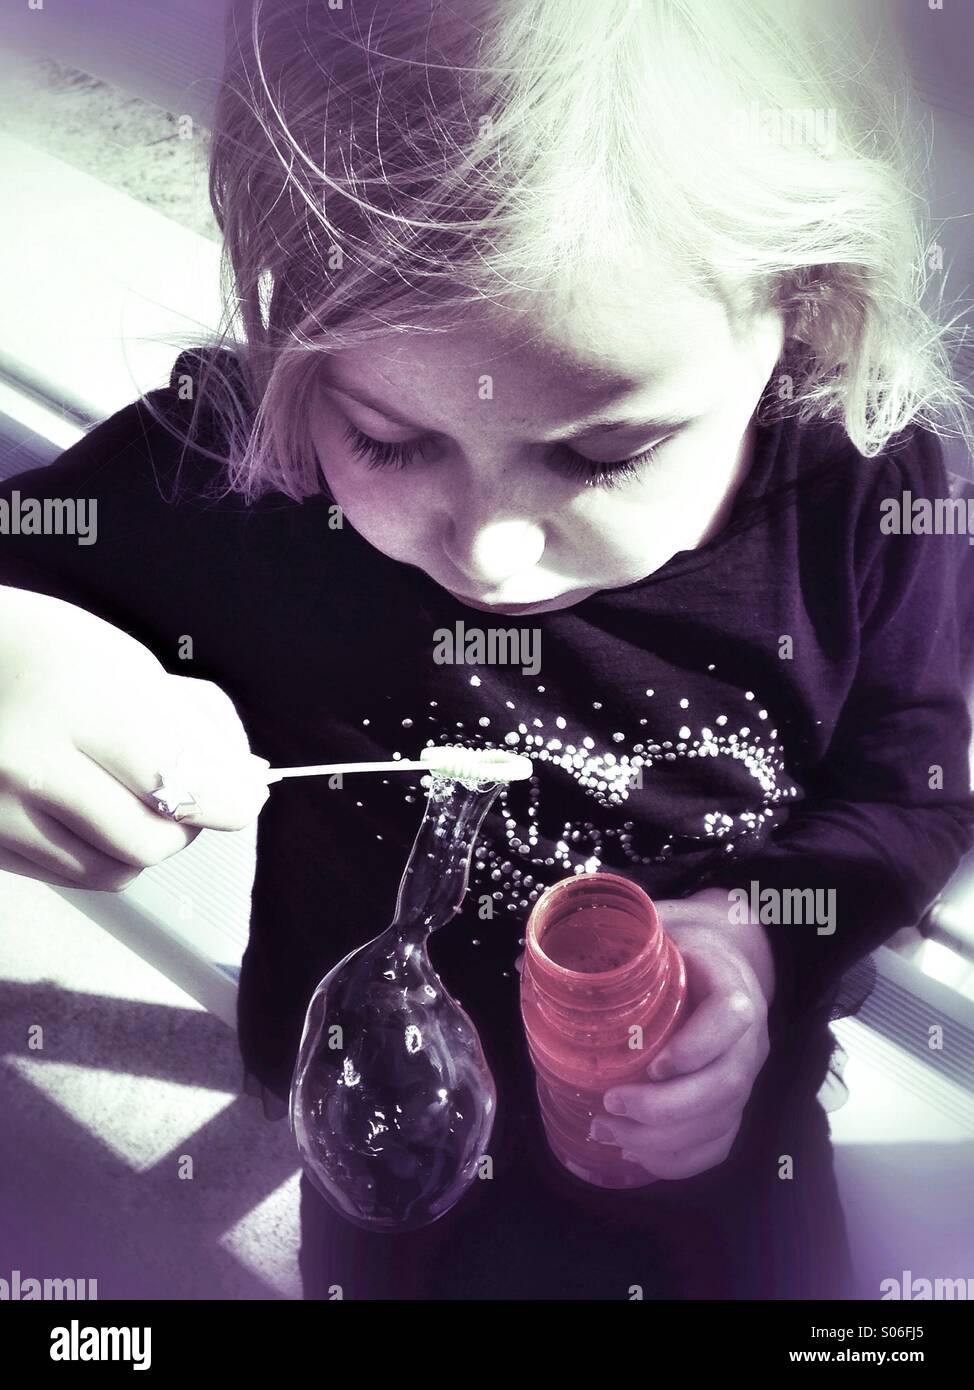 Bubble blowing girl. Stock Photo